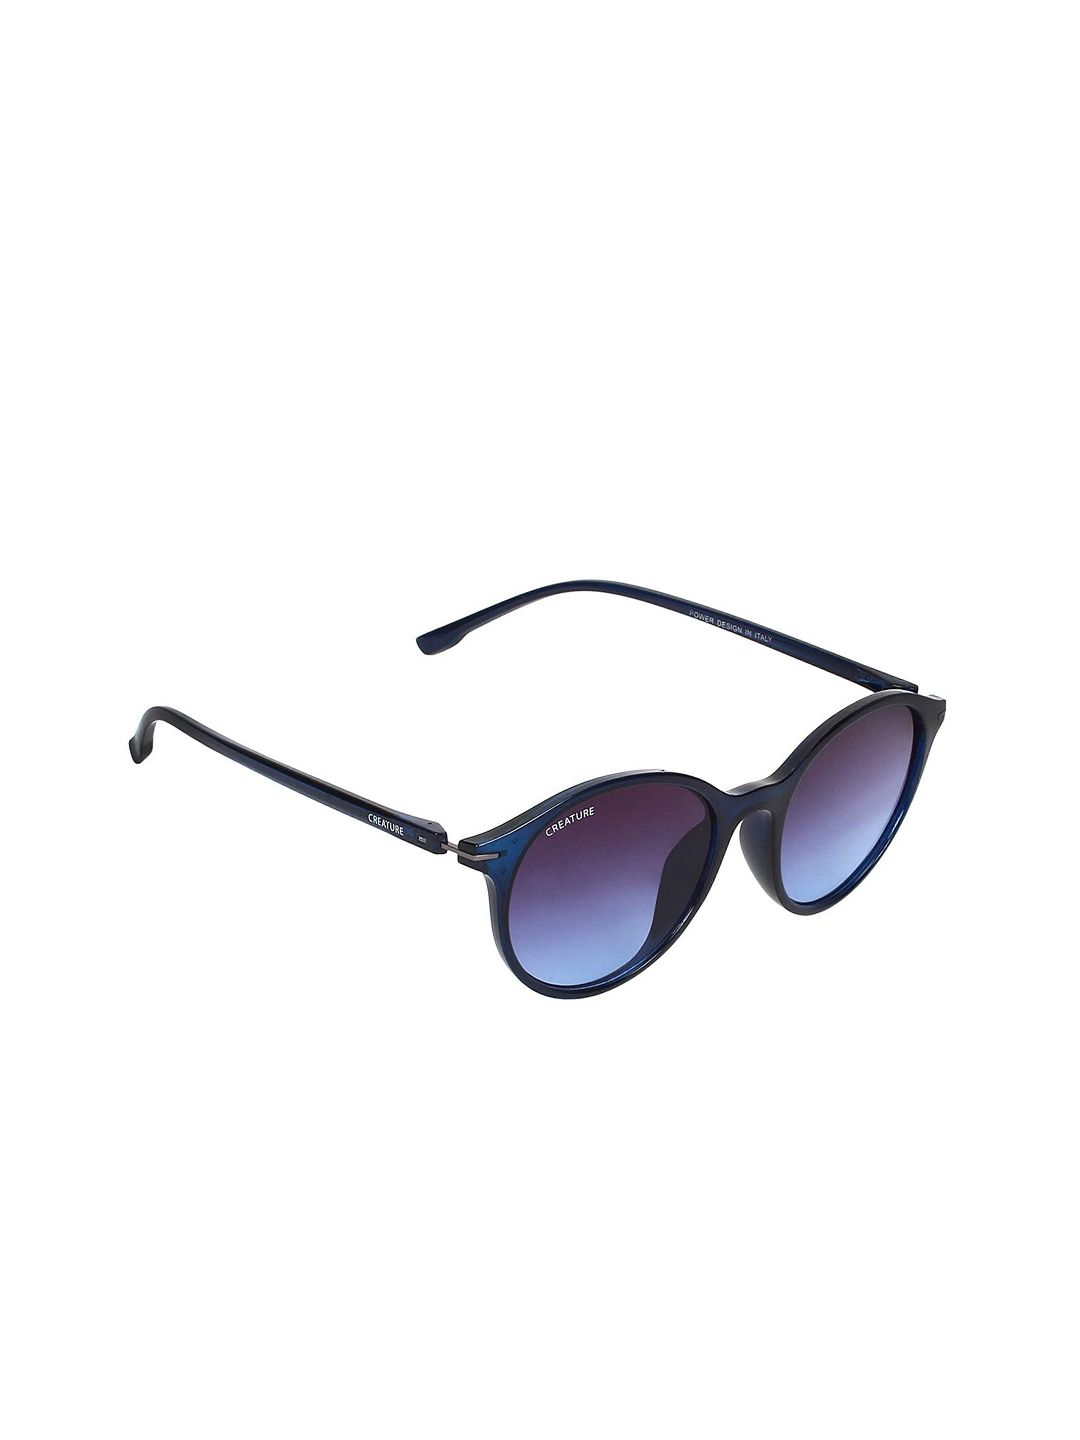 Creature Unisex Blue Lens & Blue Round Sunglasses with UV Protected Lens PWR-007 Price in India